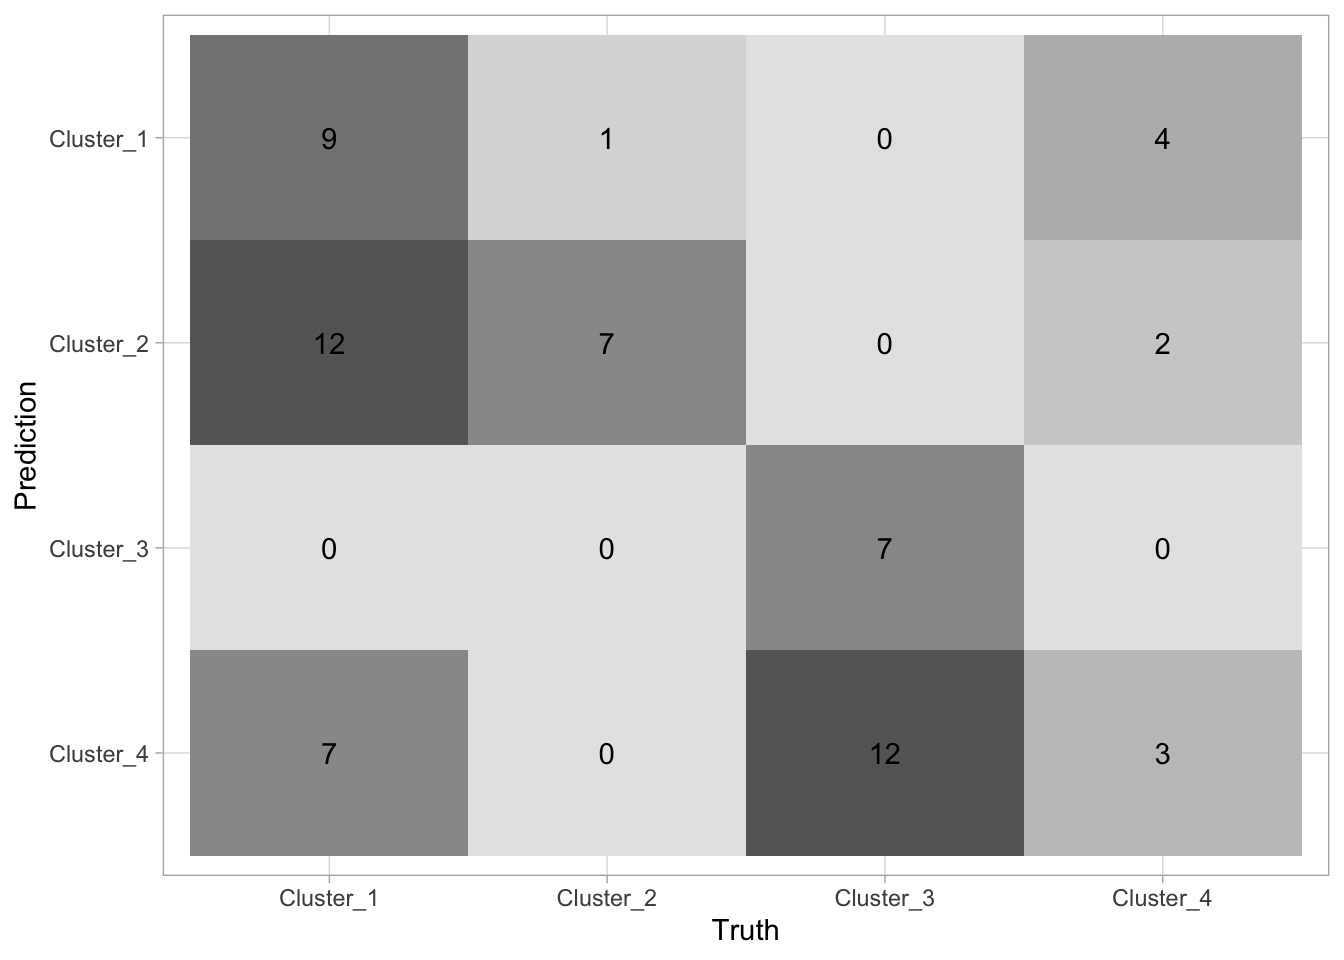 Confusion matrix, truth along x-axis and prediction along y-axis. No agreement between labels.